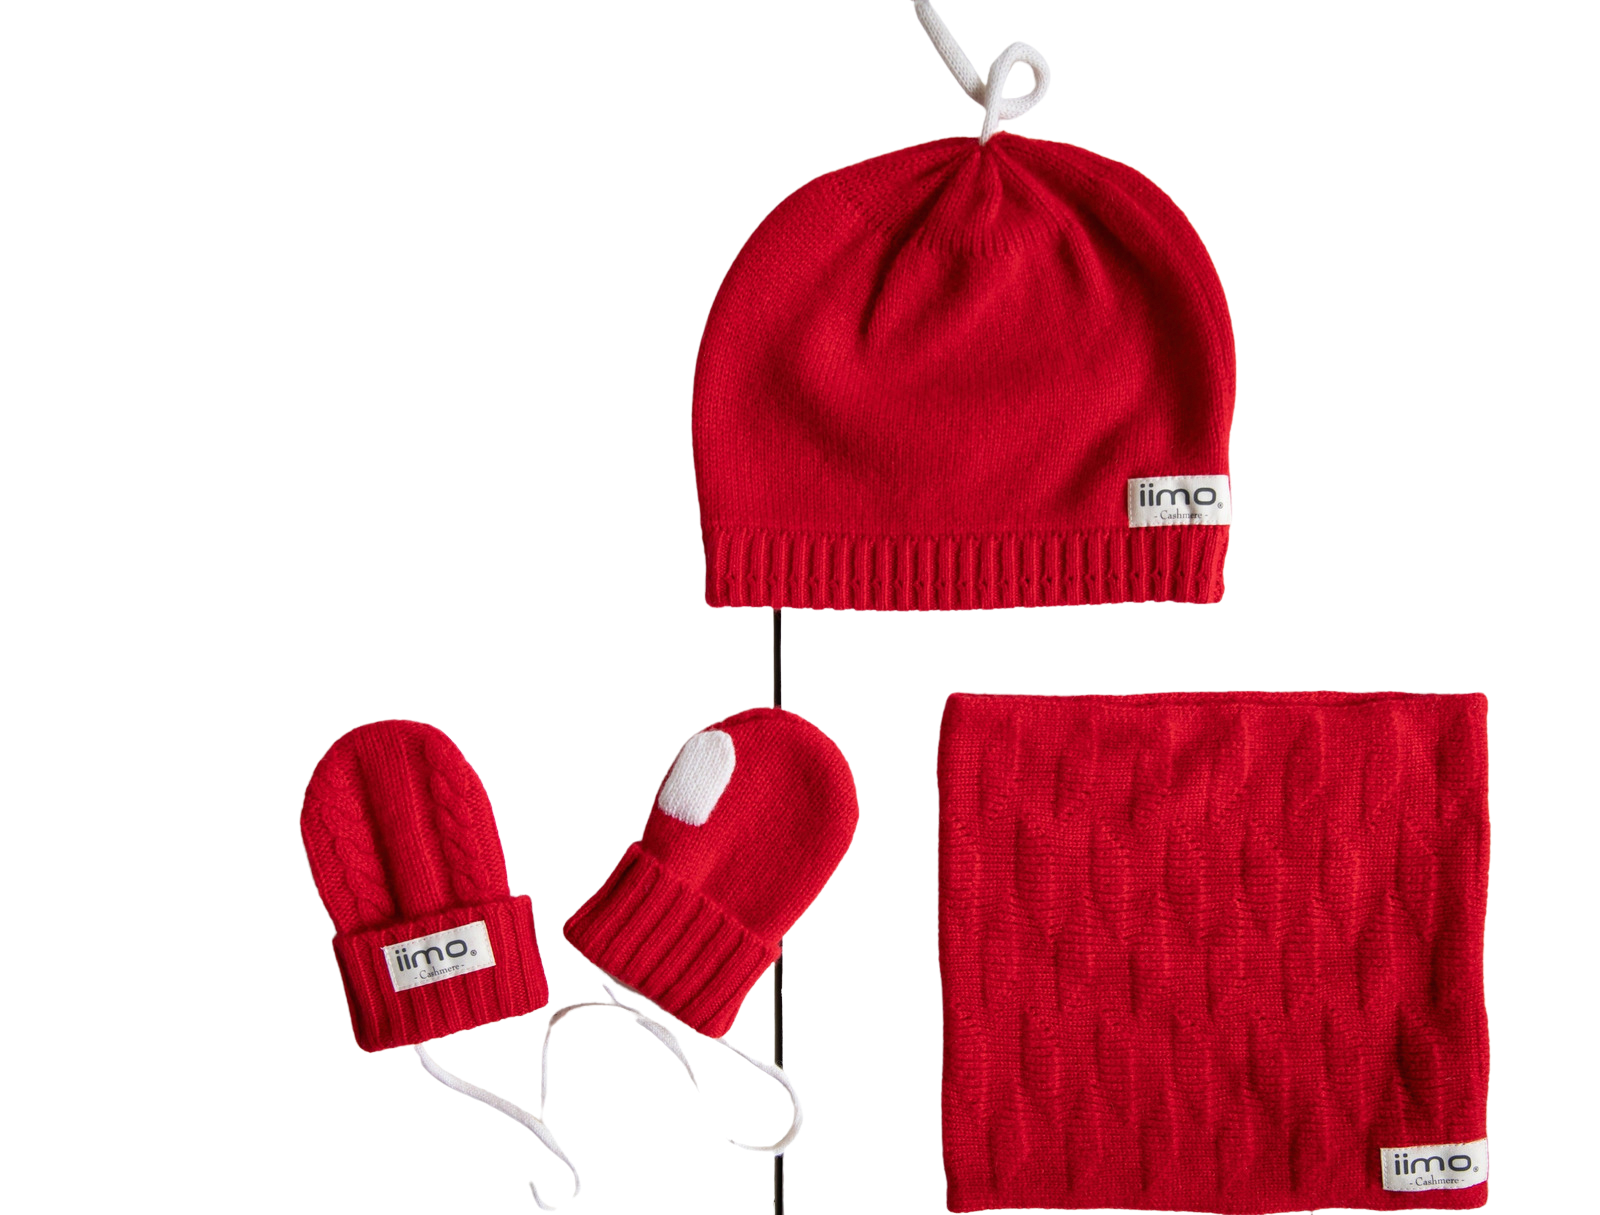 Cashmere Scarf, Hat, and Gloves